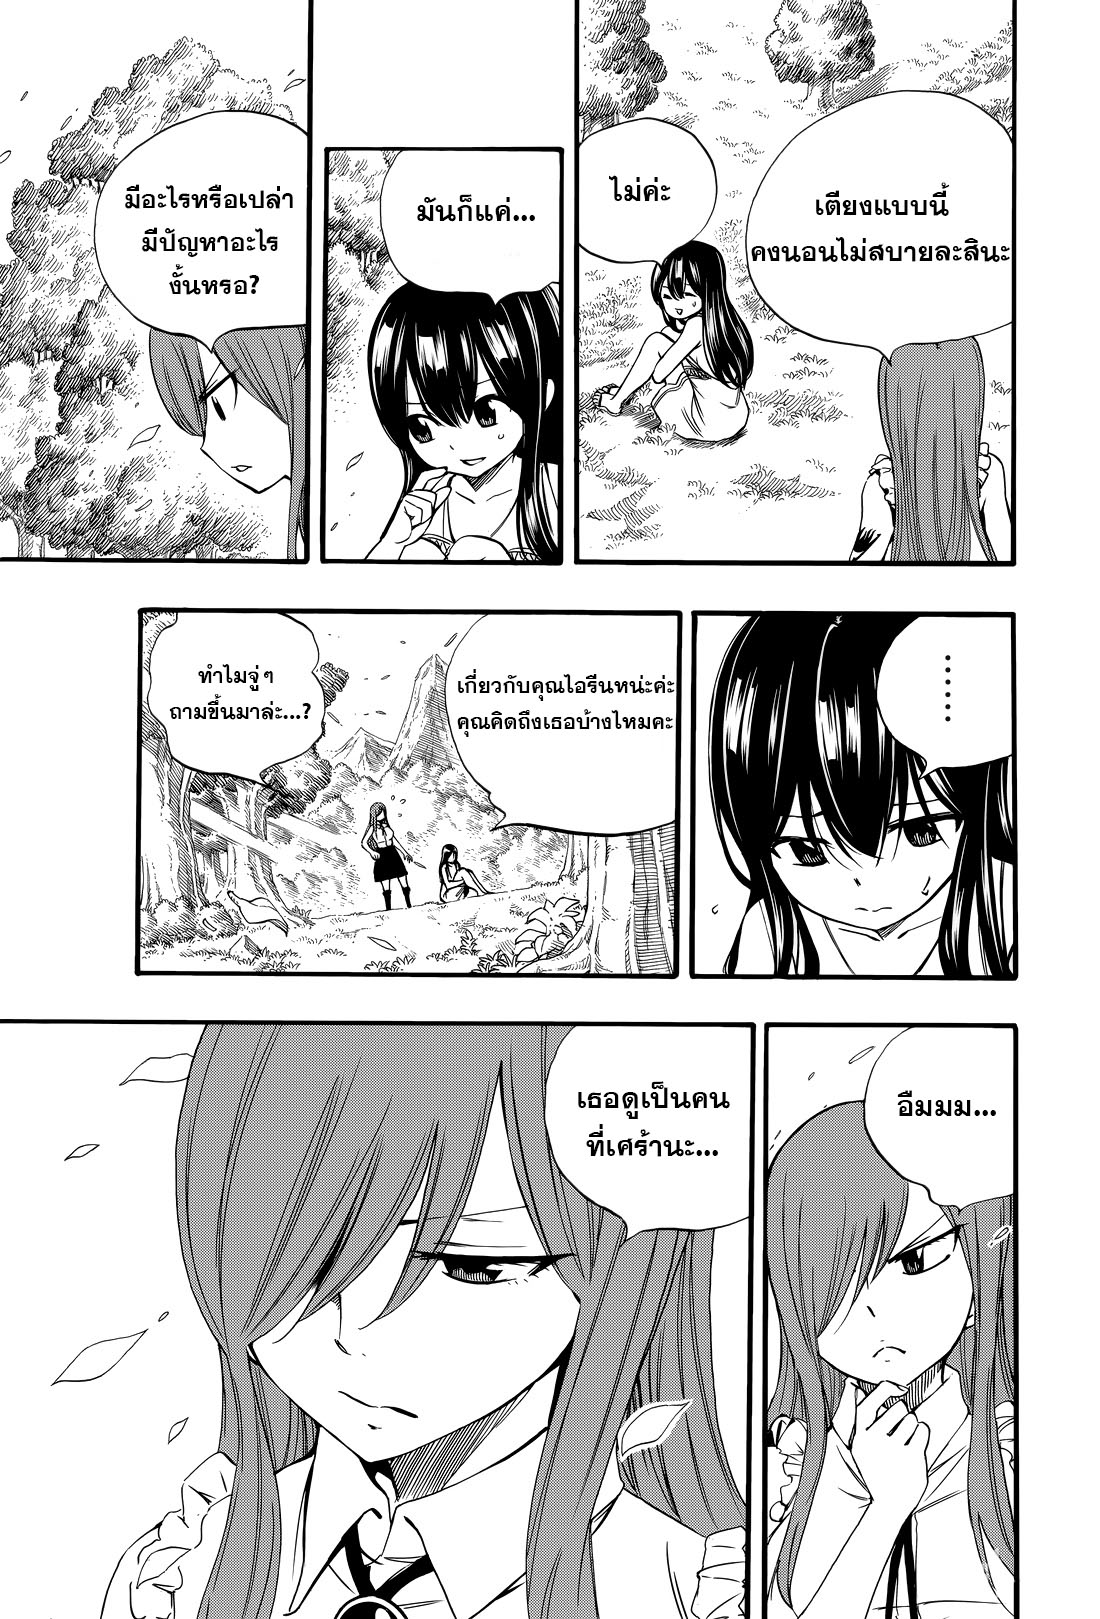 Fairy Tail 100 Years Quest 122 (3)